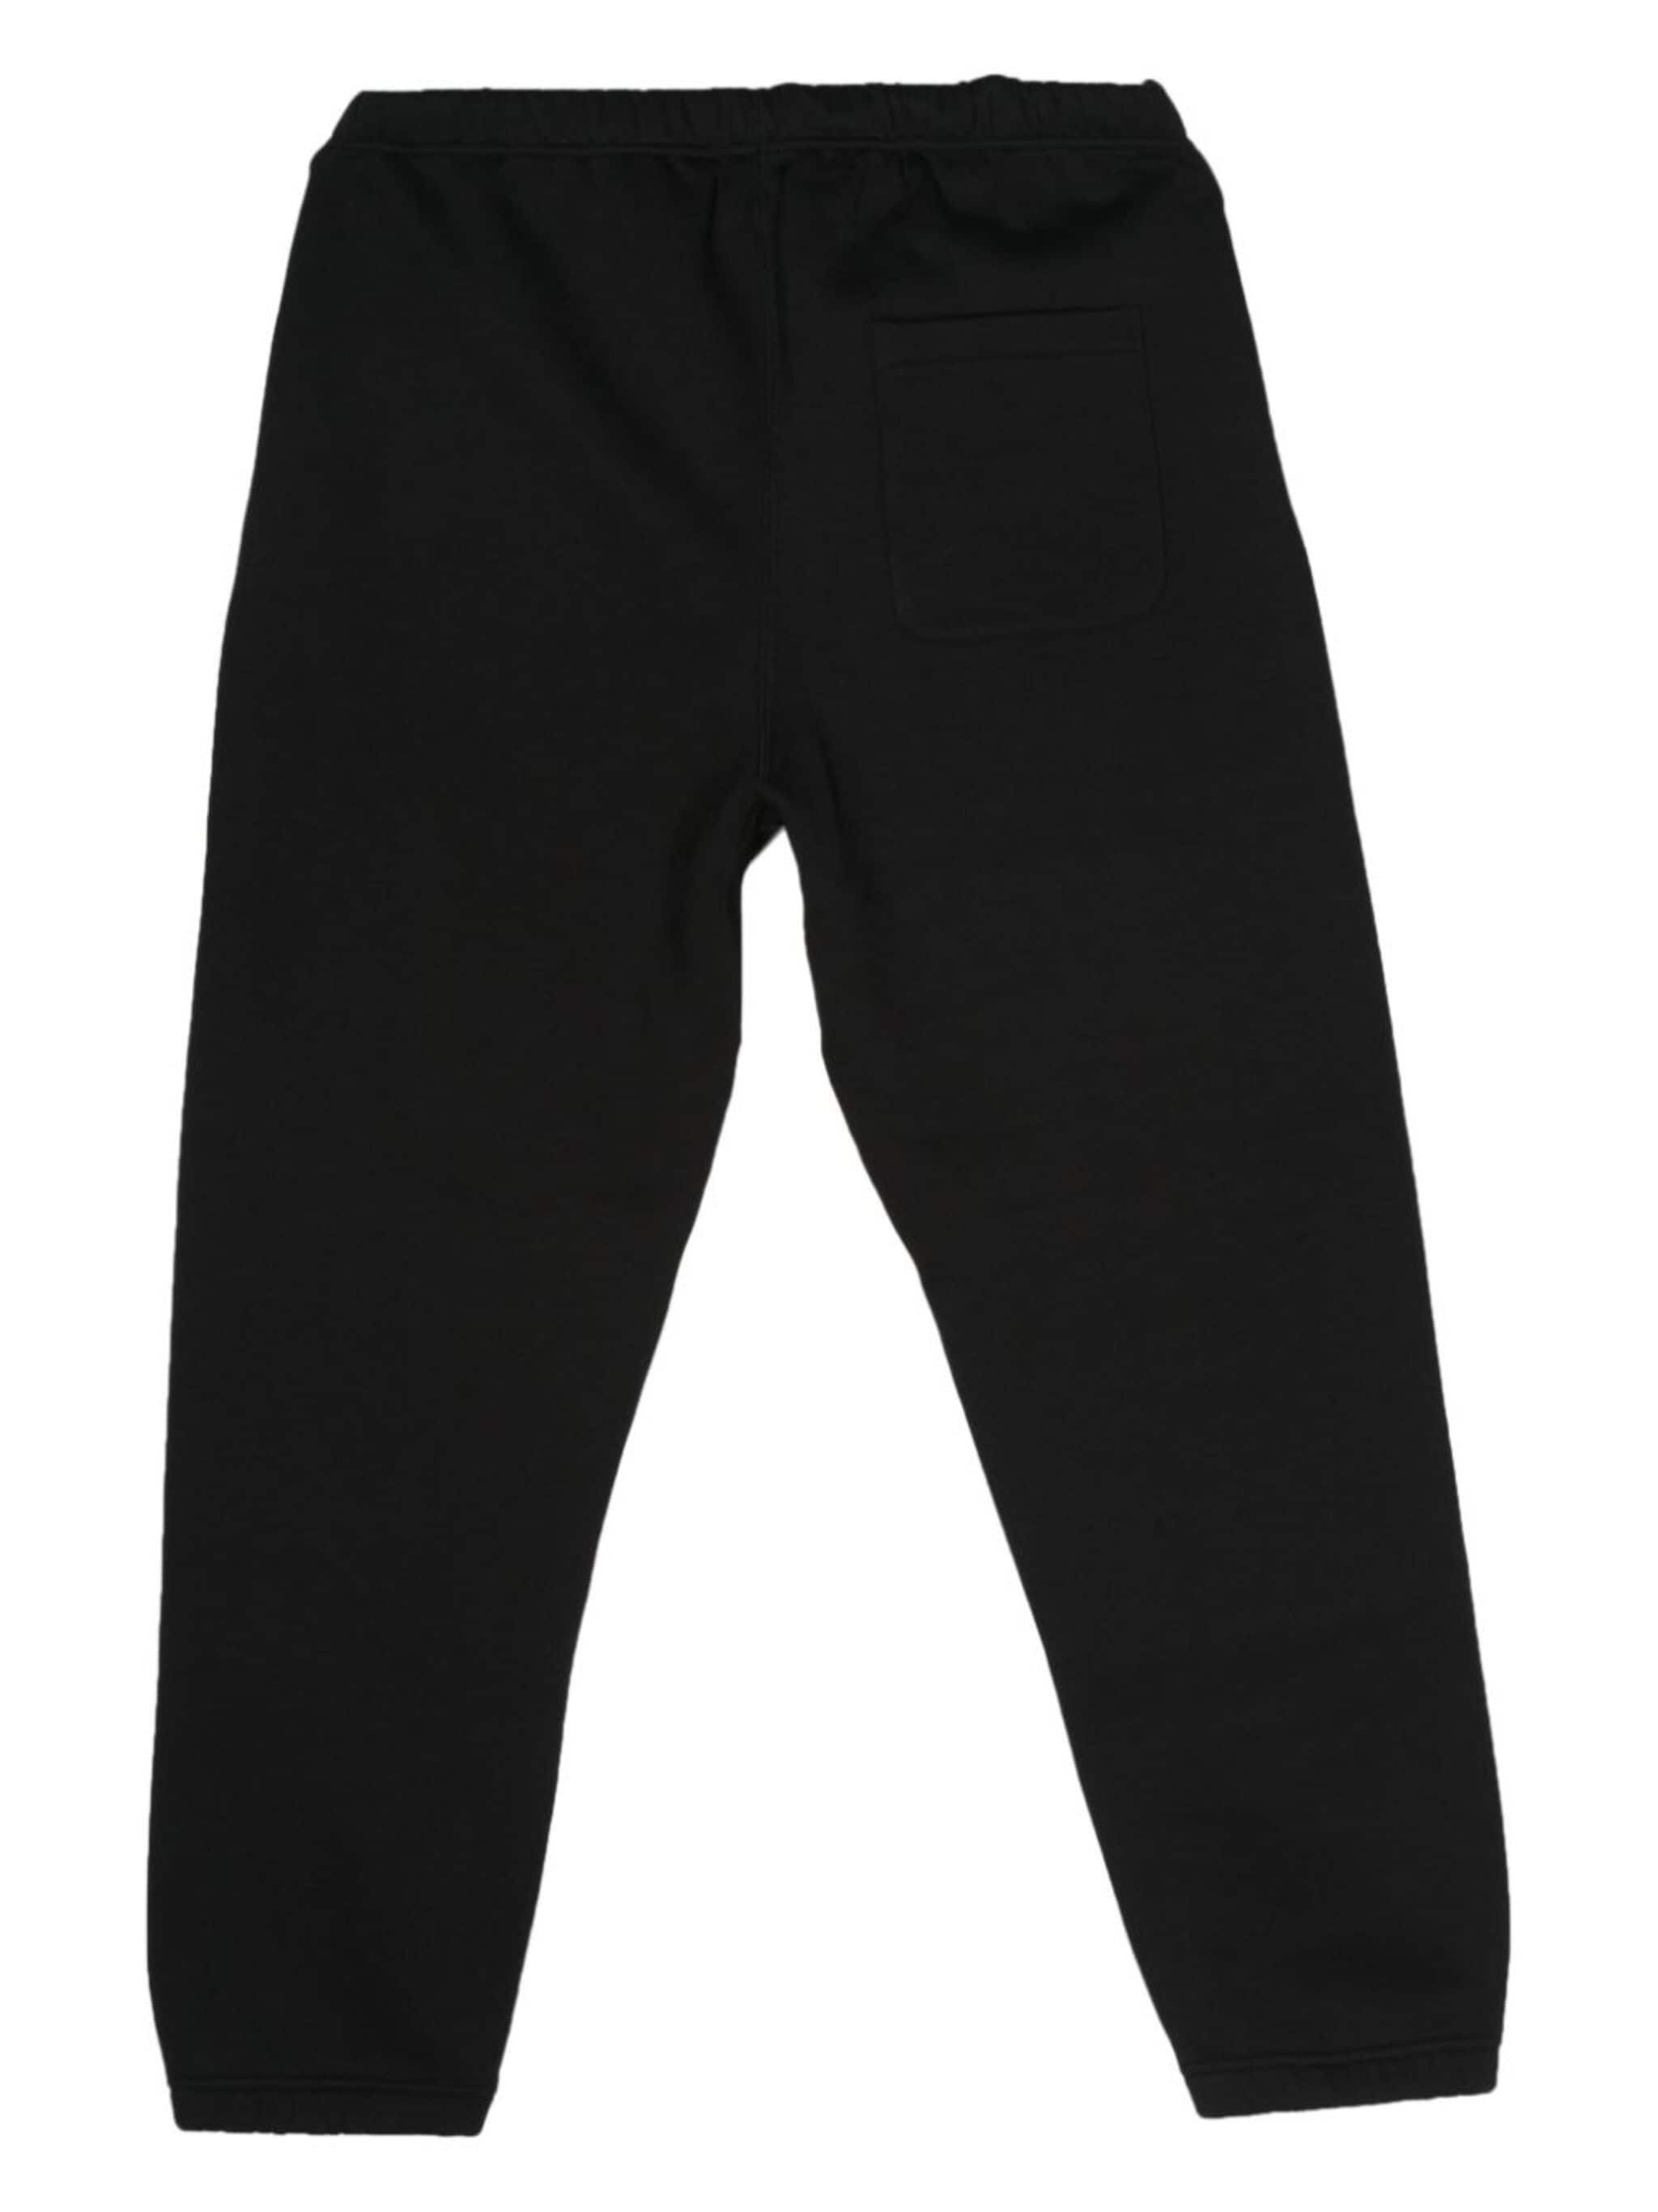 x Roc Nation by JAY Z track trousers - 2